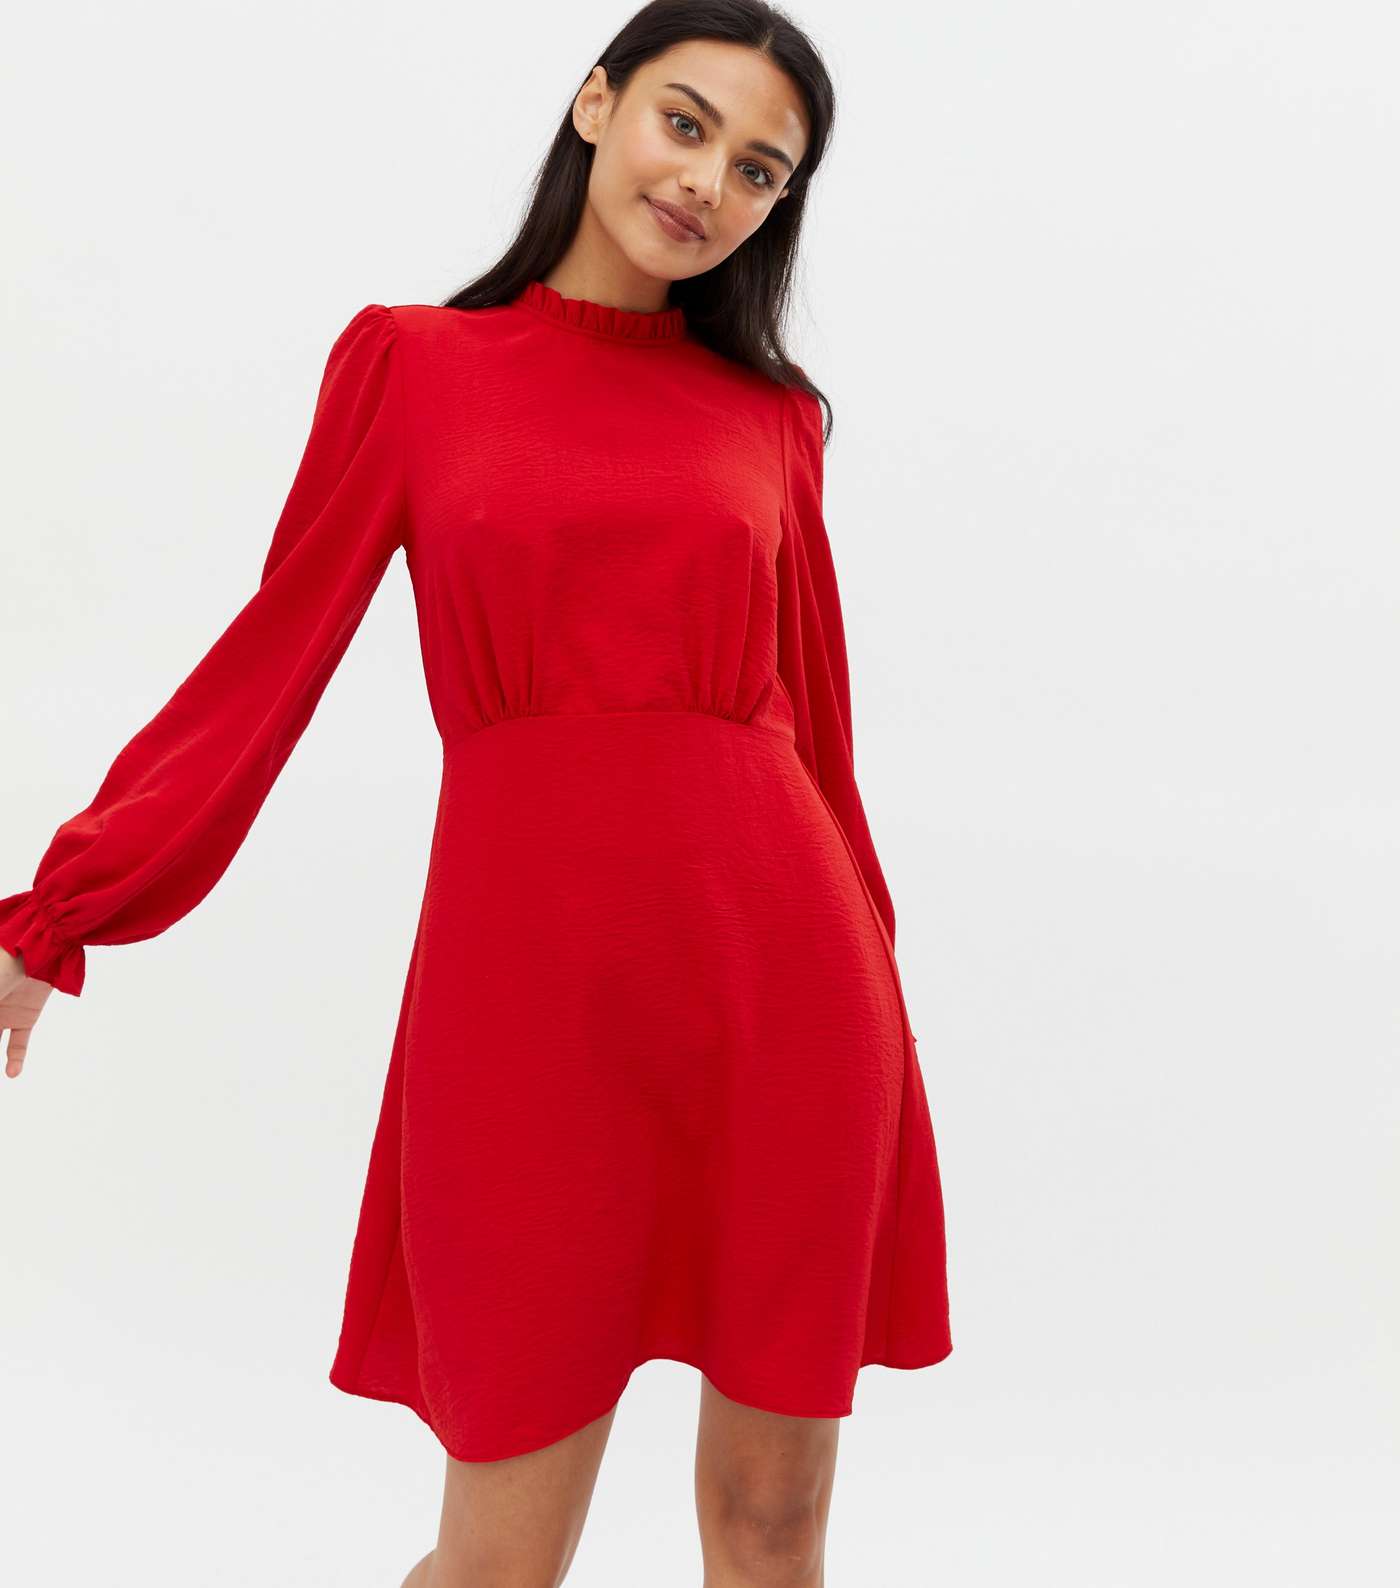 Red Frill High Neck Ruched Mini Dress